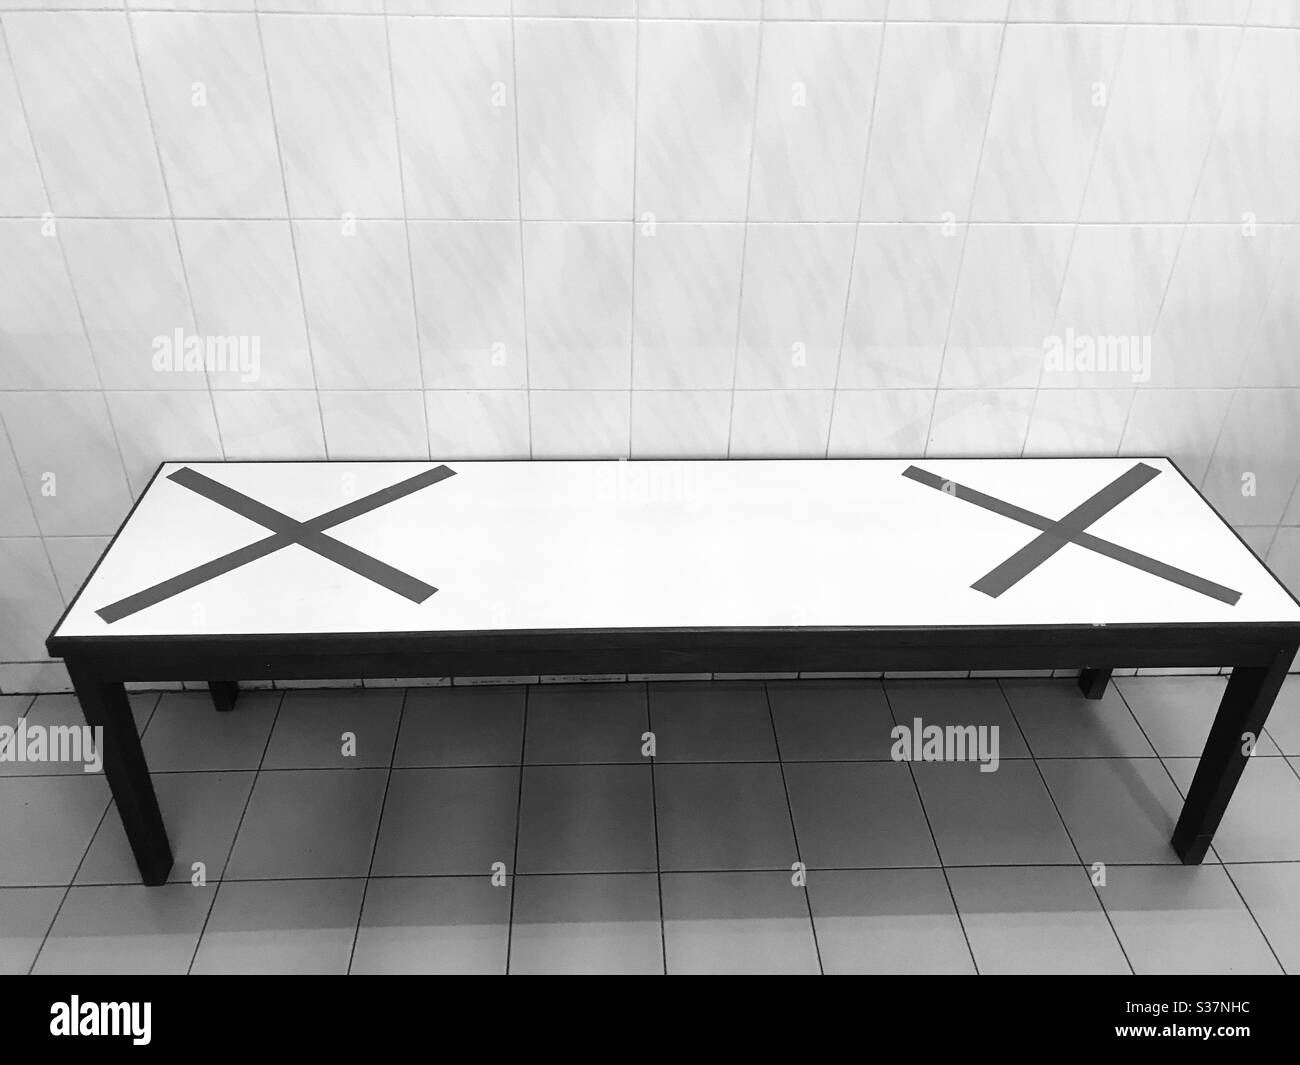 Safe distancing measures have been implemented in order to reduce the spread of the coronavirus.Singapore-Seating benches  are masked with Red adhesive tape to indicate that people should not sit.b&w Stock Photo